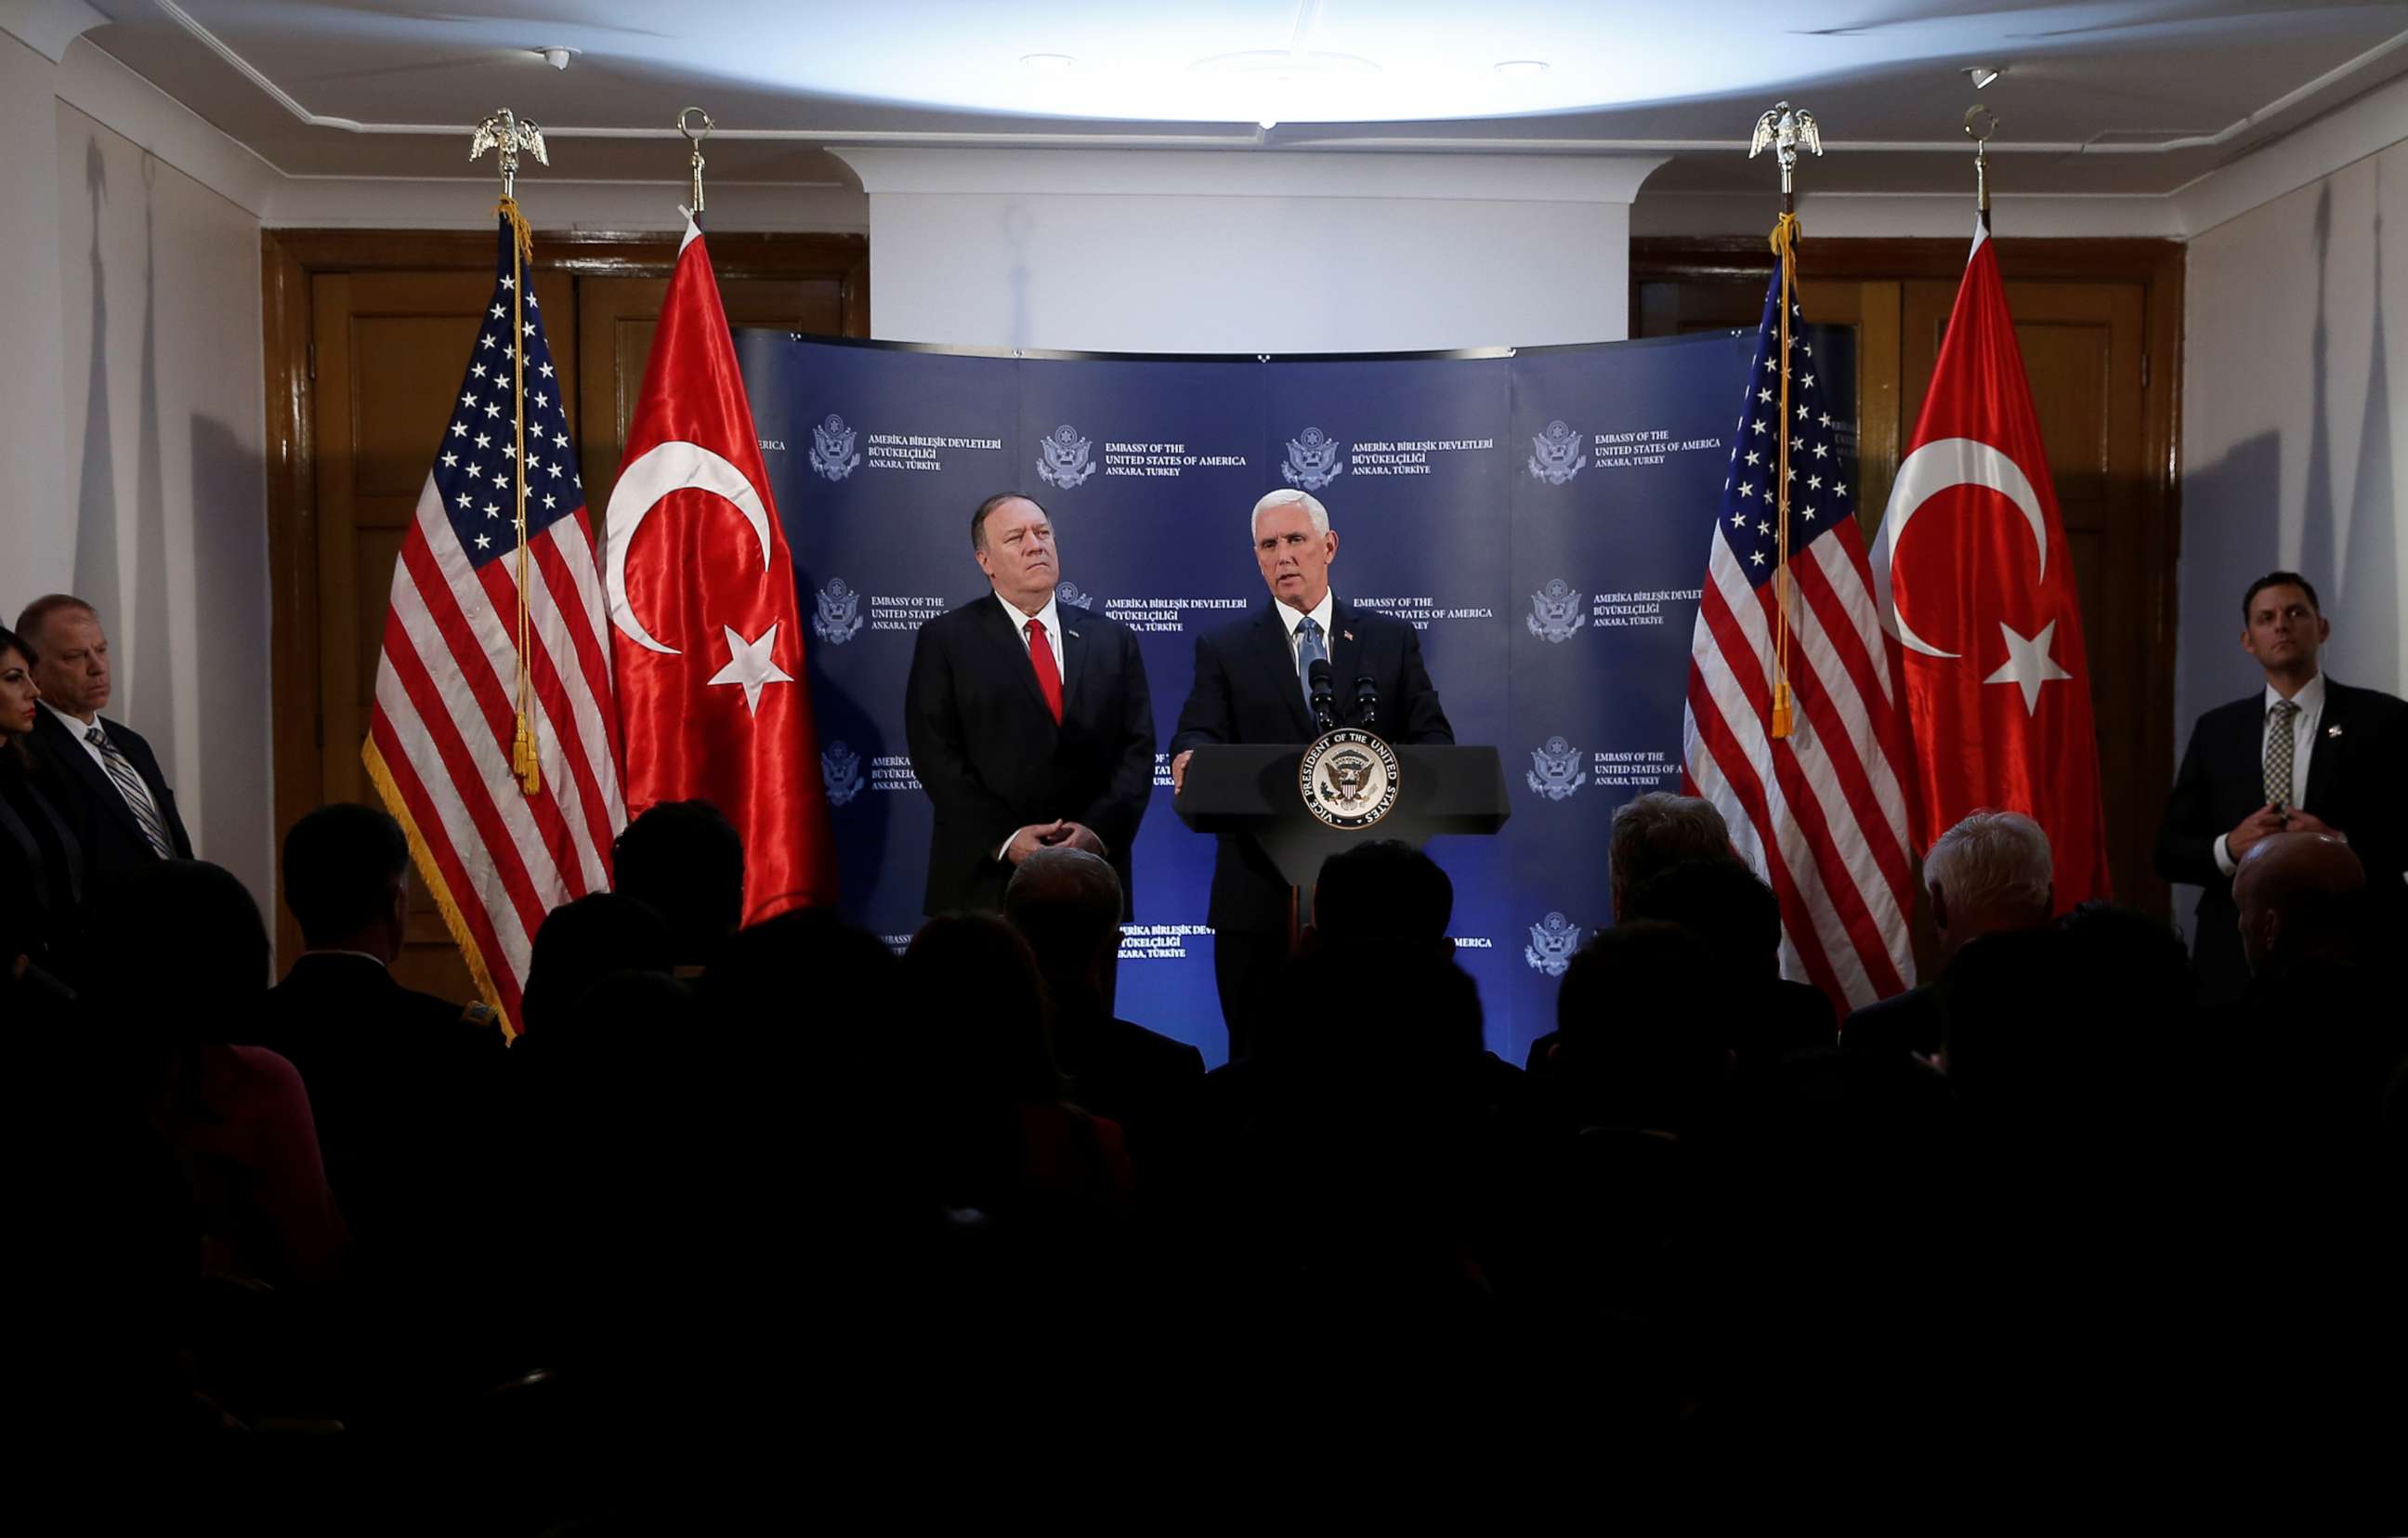 PHOTO: Vice President Mike Pence speaks during a news conference, as Secretary of State Mike Pompeo looks on, at the U.S. Embassy in Ankara, Turkey, Oct. 17, 2019.